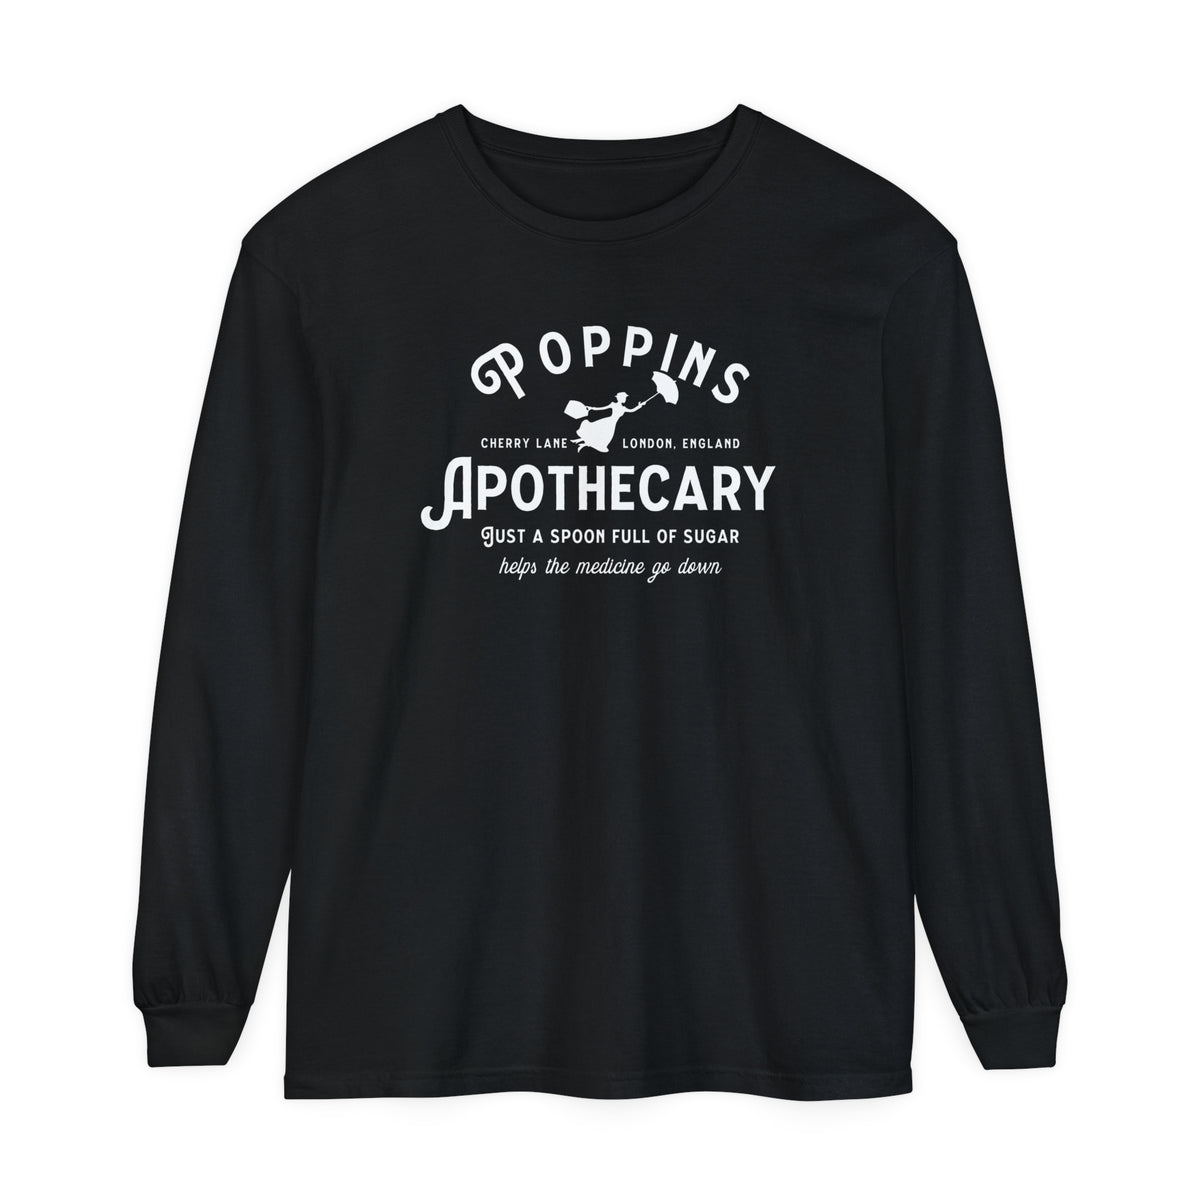 Poppins Apothecary Comfort Colors Unisex Garment-dyed Long Sleeve T-Shirt